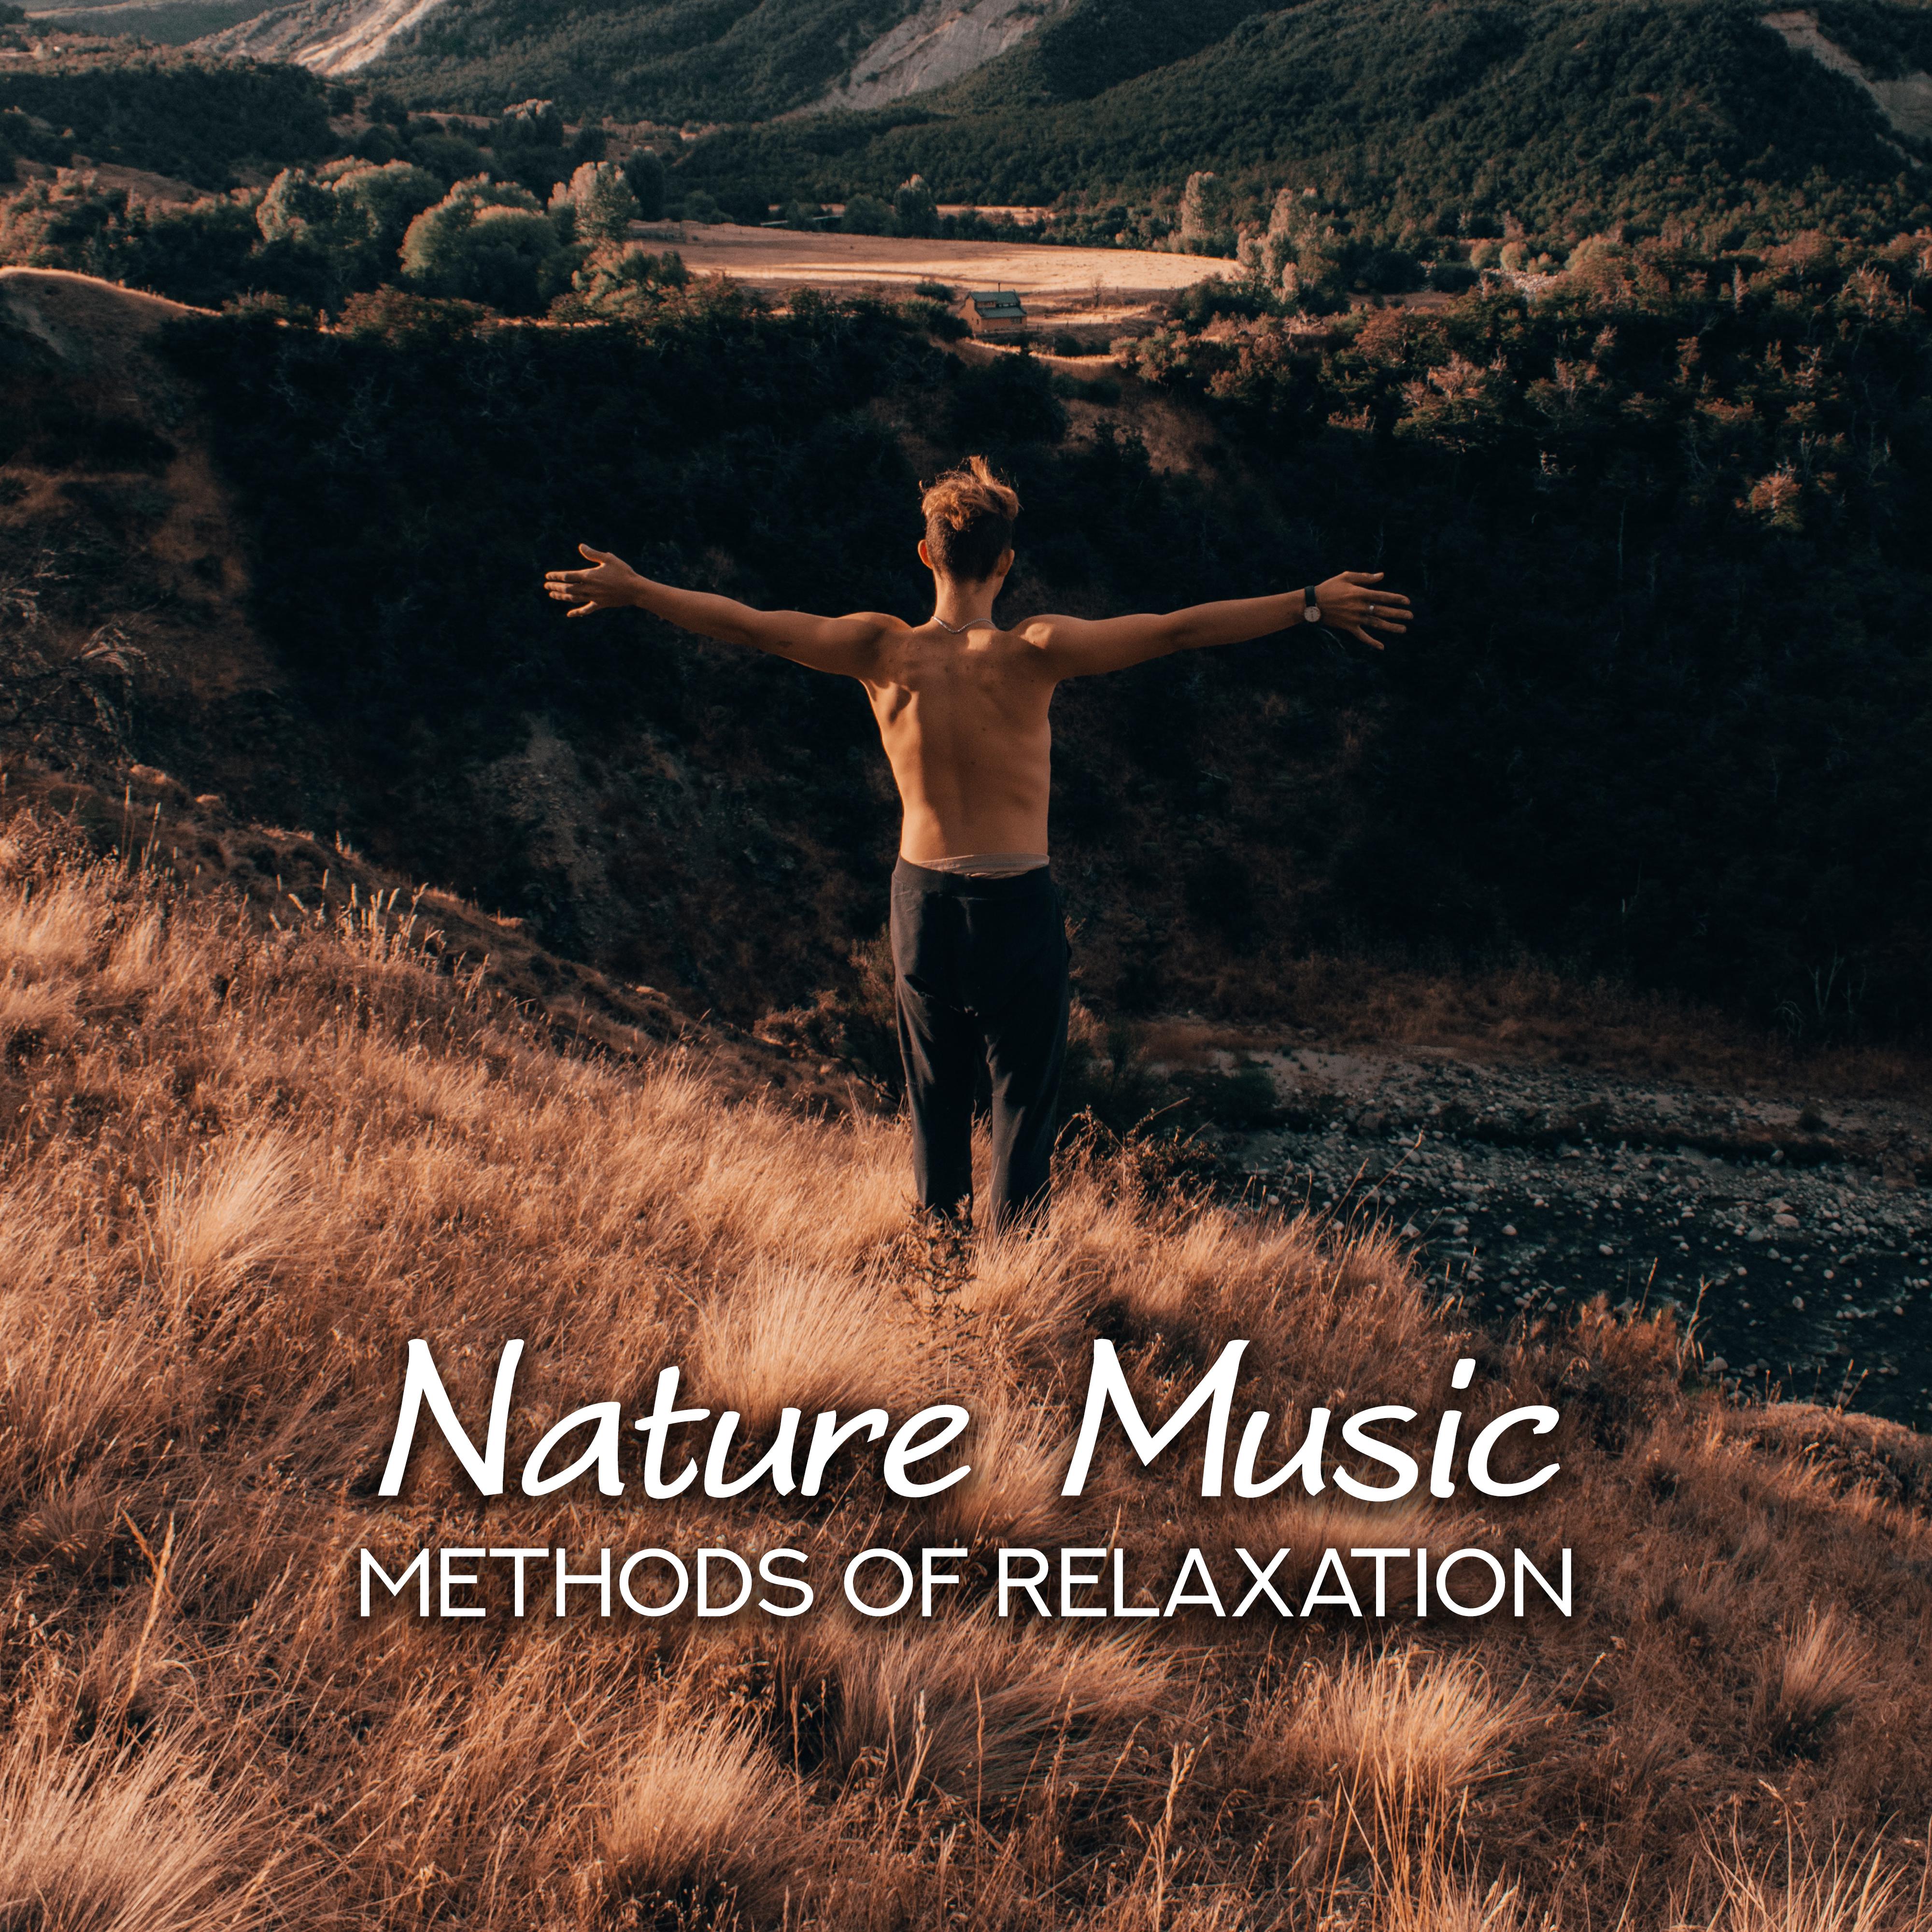 Nature Music Methods of Relaxation